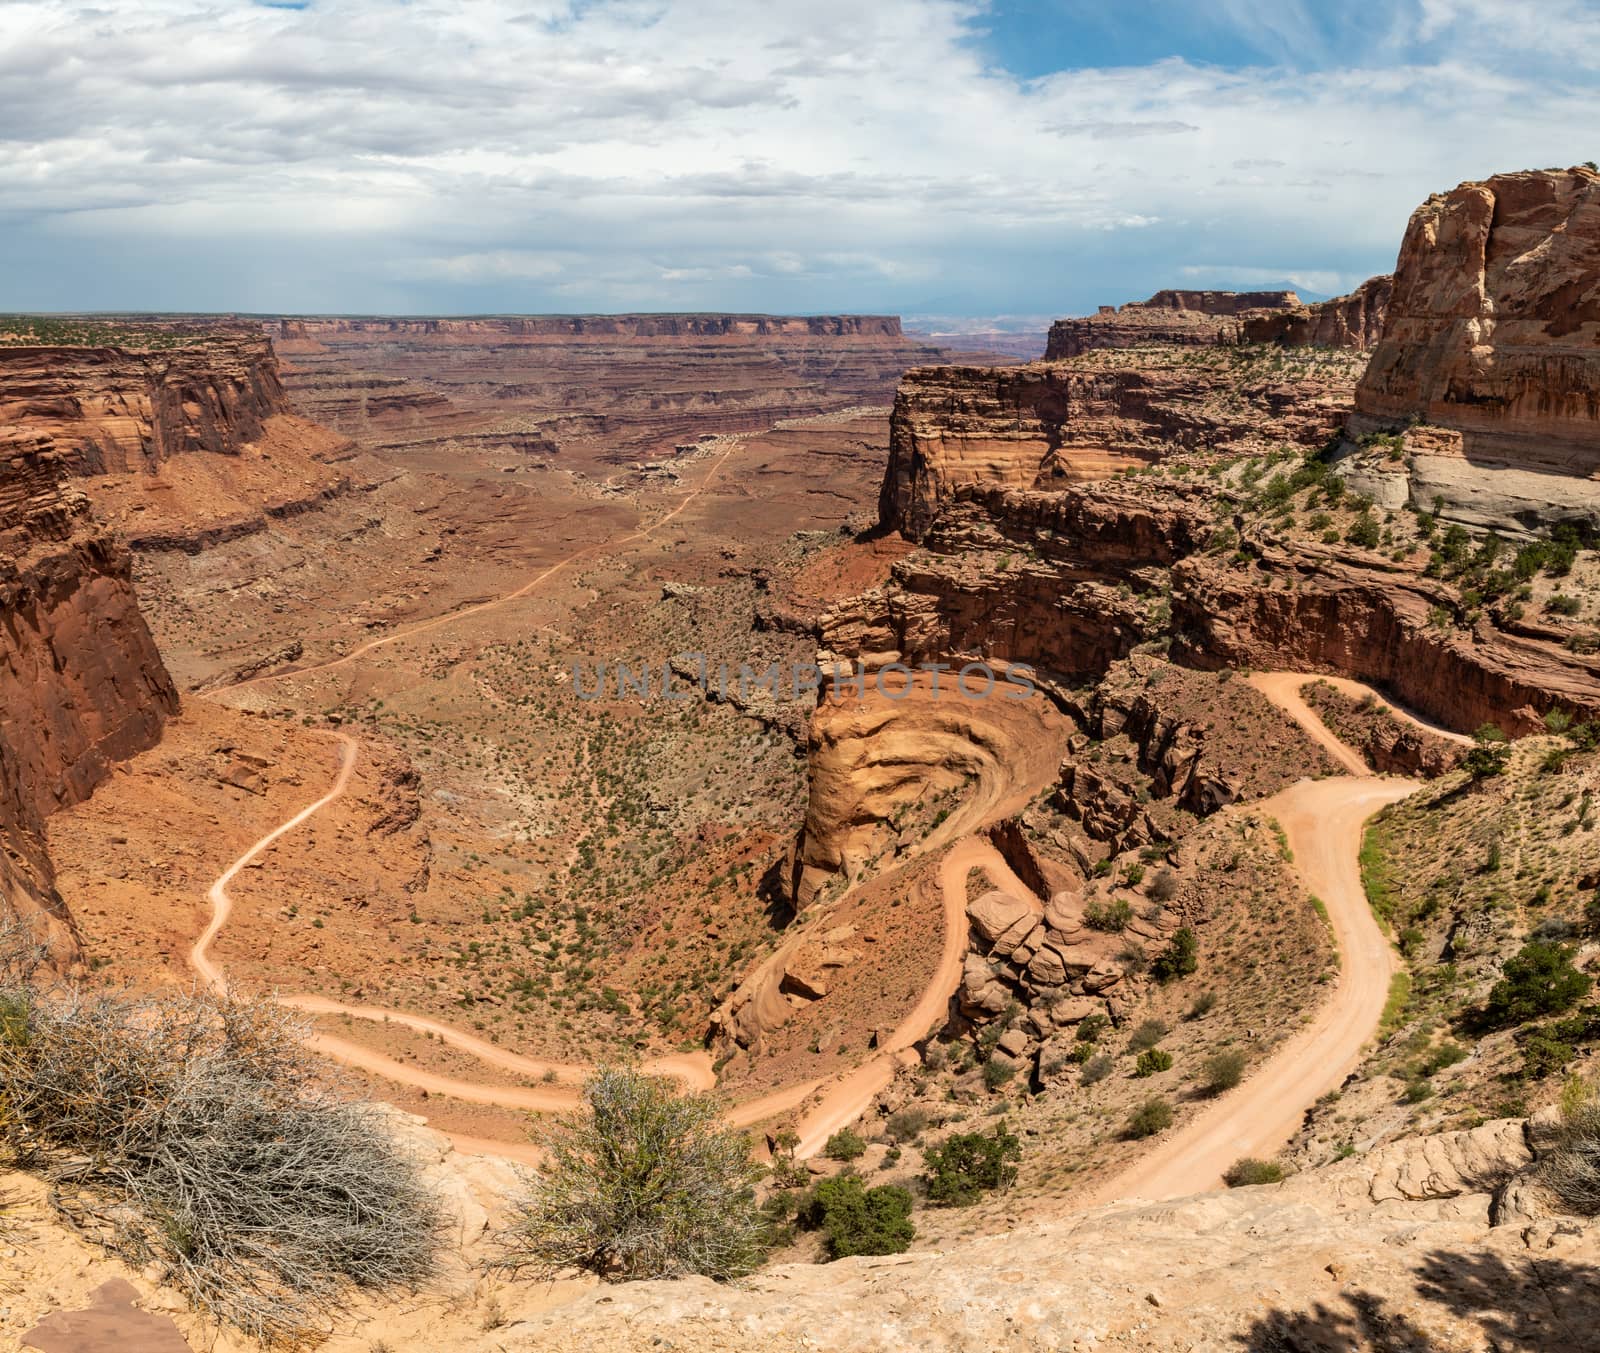 Shafer Canyon Road in Canyonlands National Park, Utah by Njean